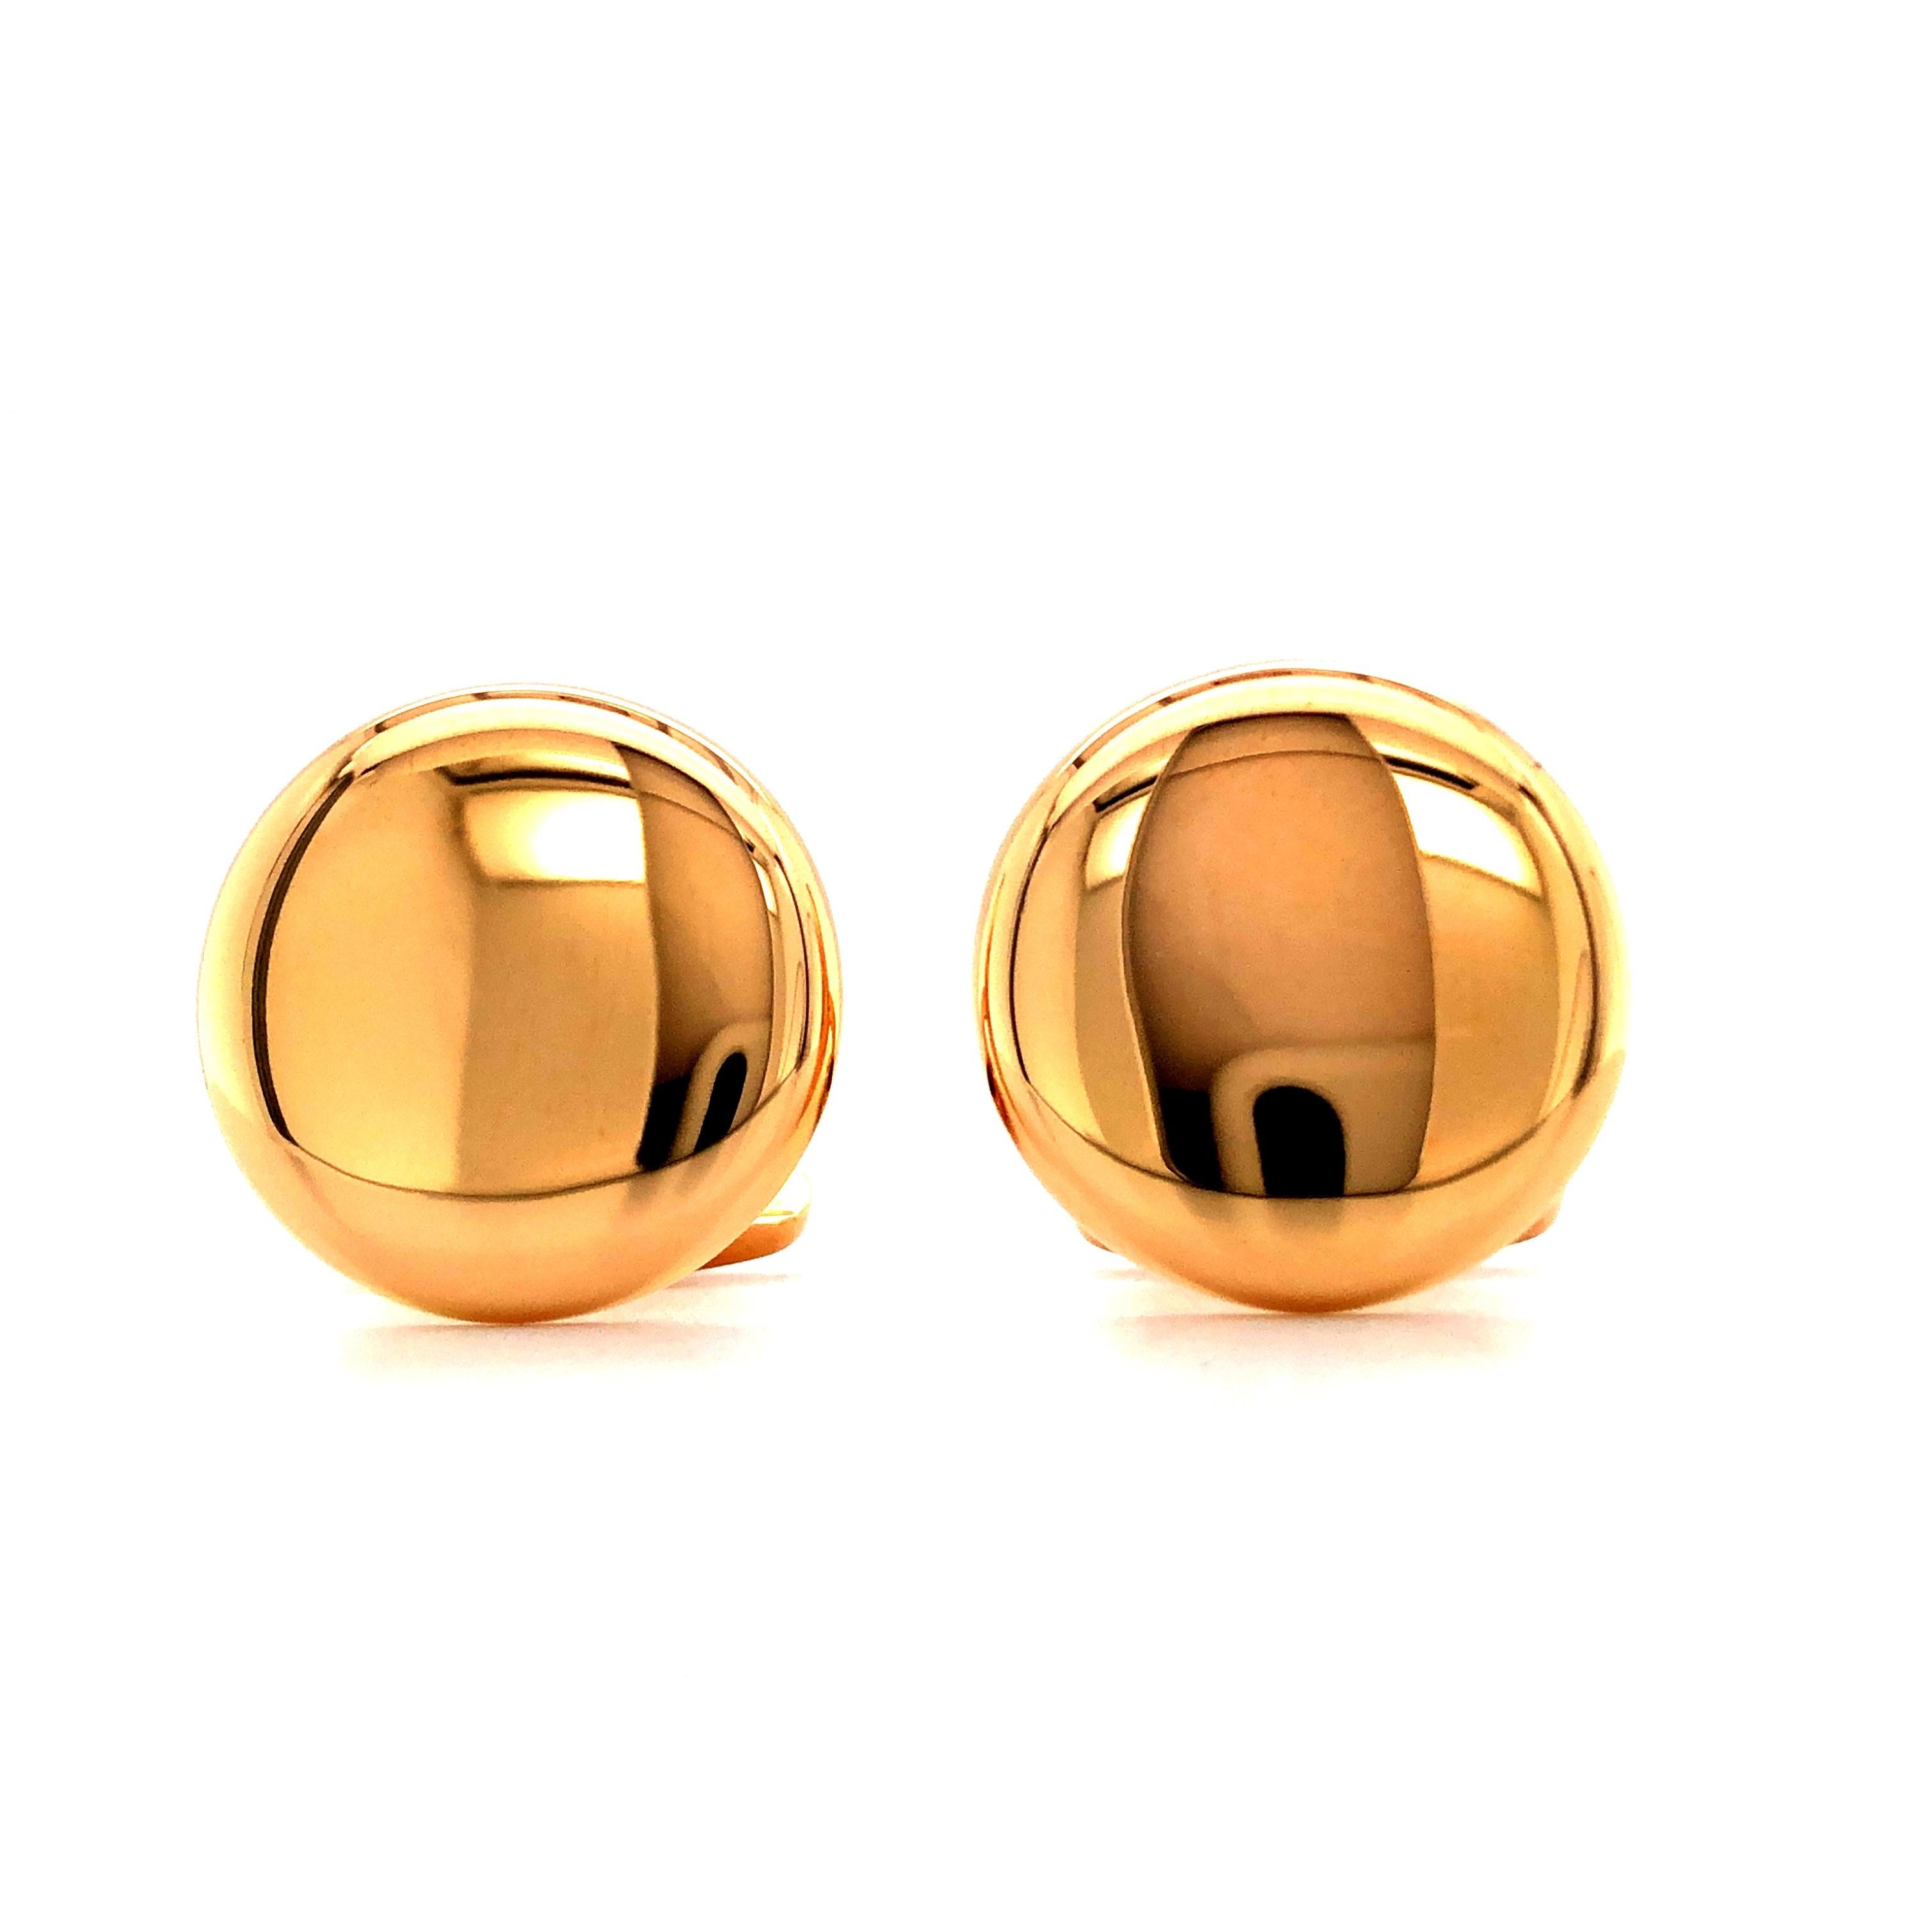 Victor Mayer Round Cufflinks Slightly Domed, Hallmark Collection, 18k Rose Gold, Diameter Approx. 21.6 mm

About the creator Victor Mayer
Victor Mayer is internationally renowned for elegant timeless designs and unrivalled expertise in historic